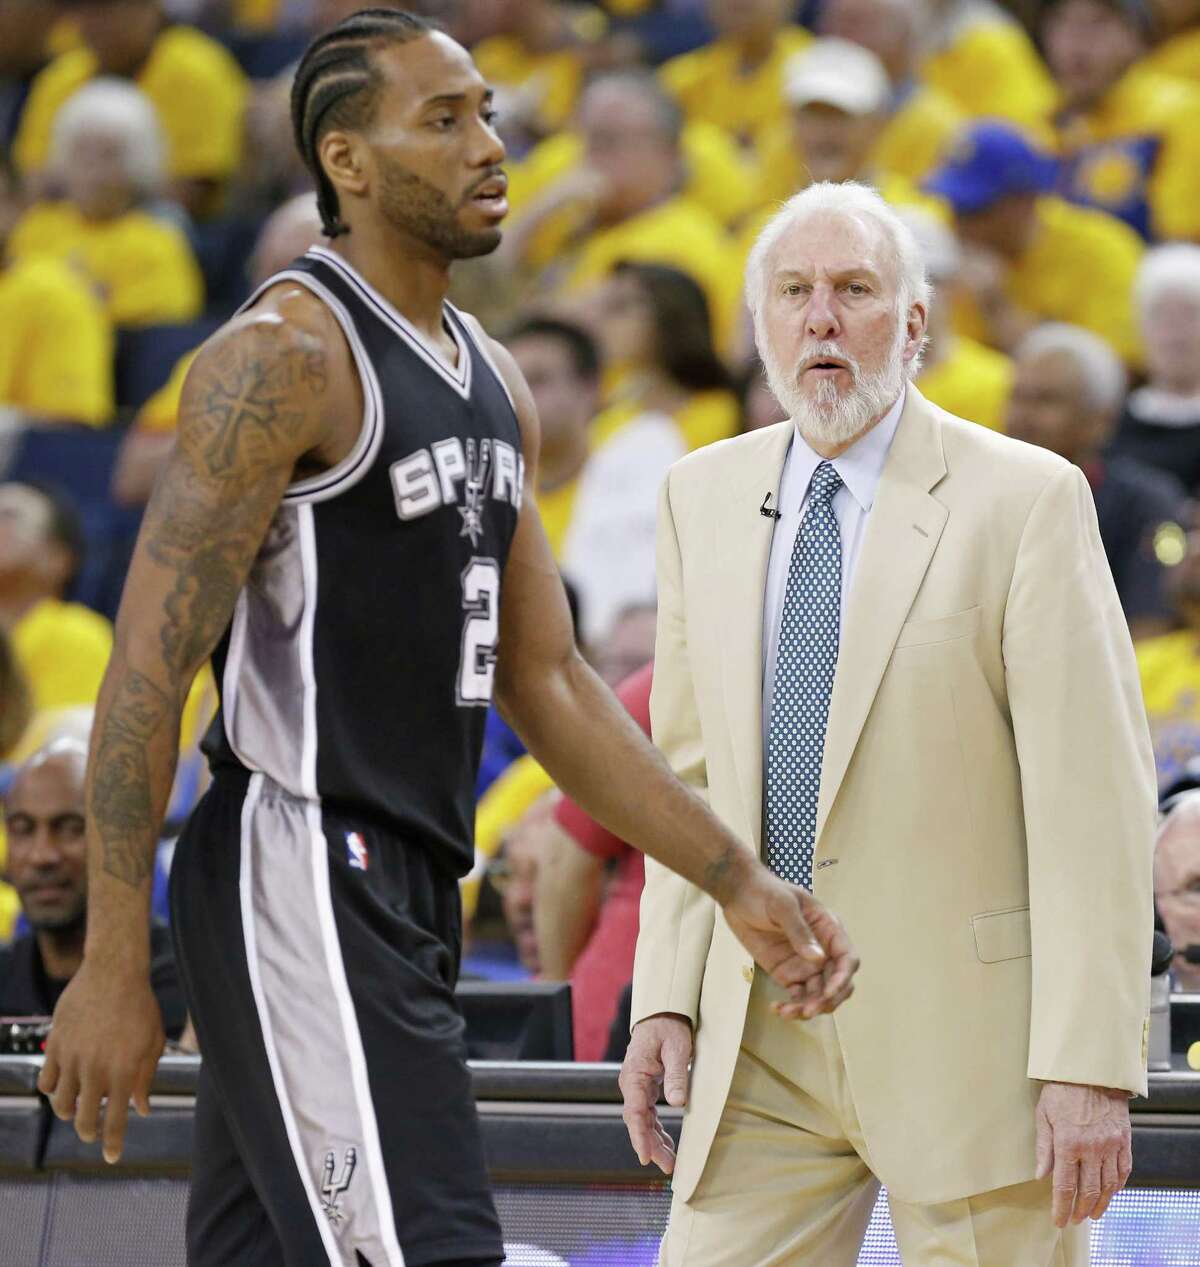 Spurs’ Kawhi Leonard walks to the bench past head coach Gregg Popovich during second half action of Game 1 in the Western Conference fFinals against the Golden State Warriors on May 14, 2017 at Oracle Arena in Oakland, Calif.